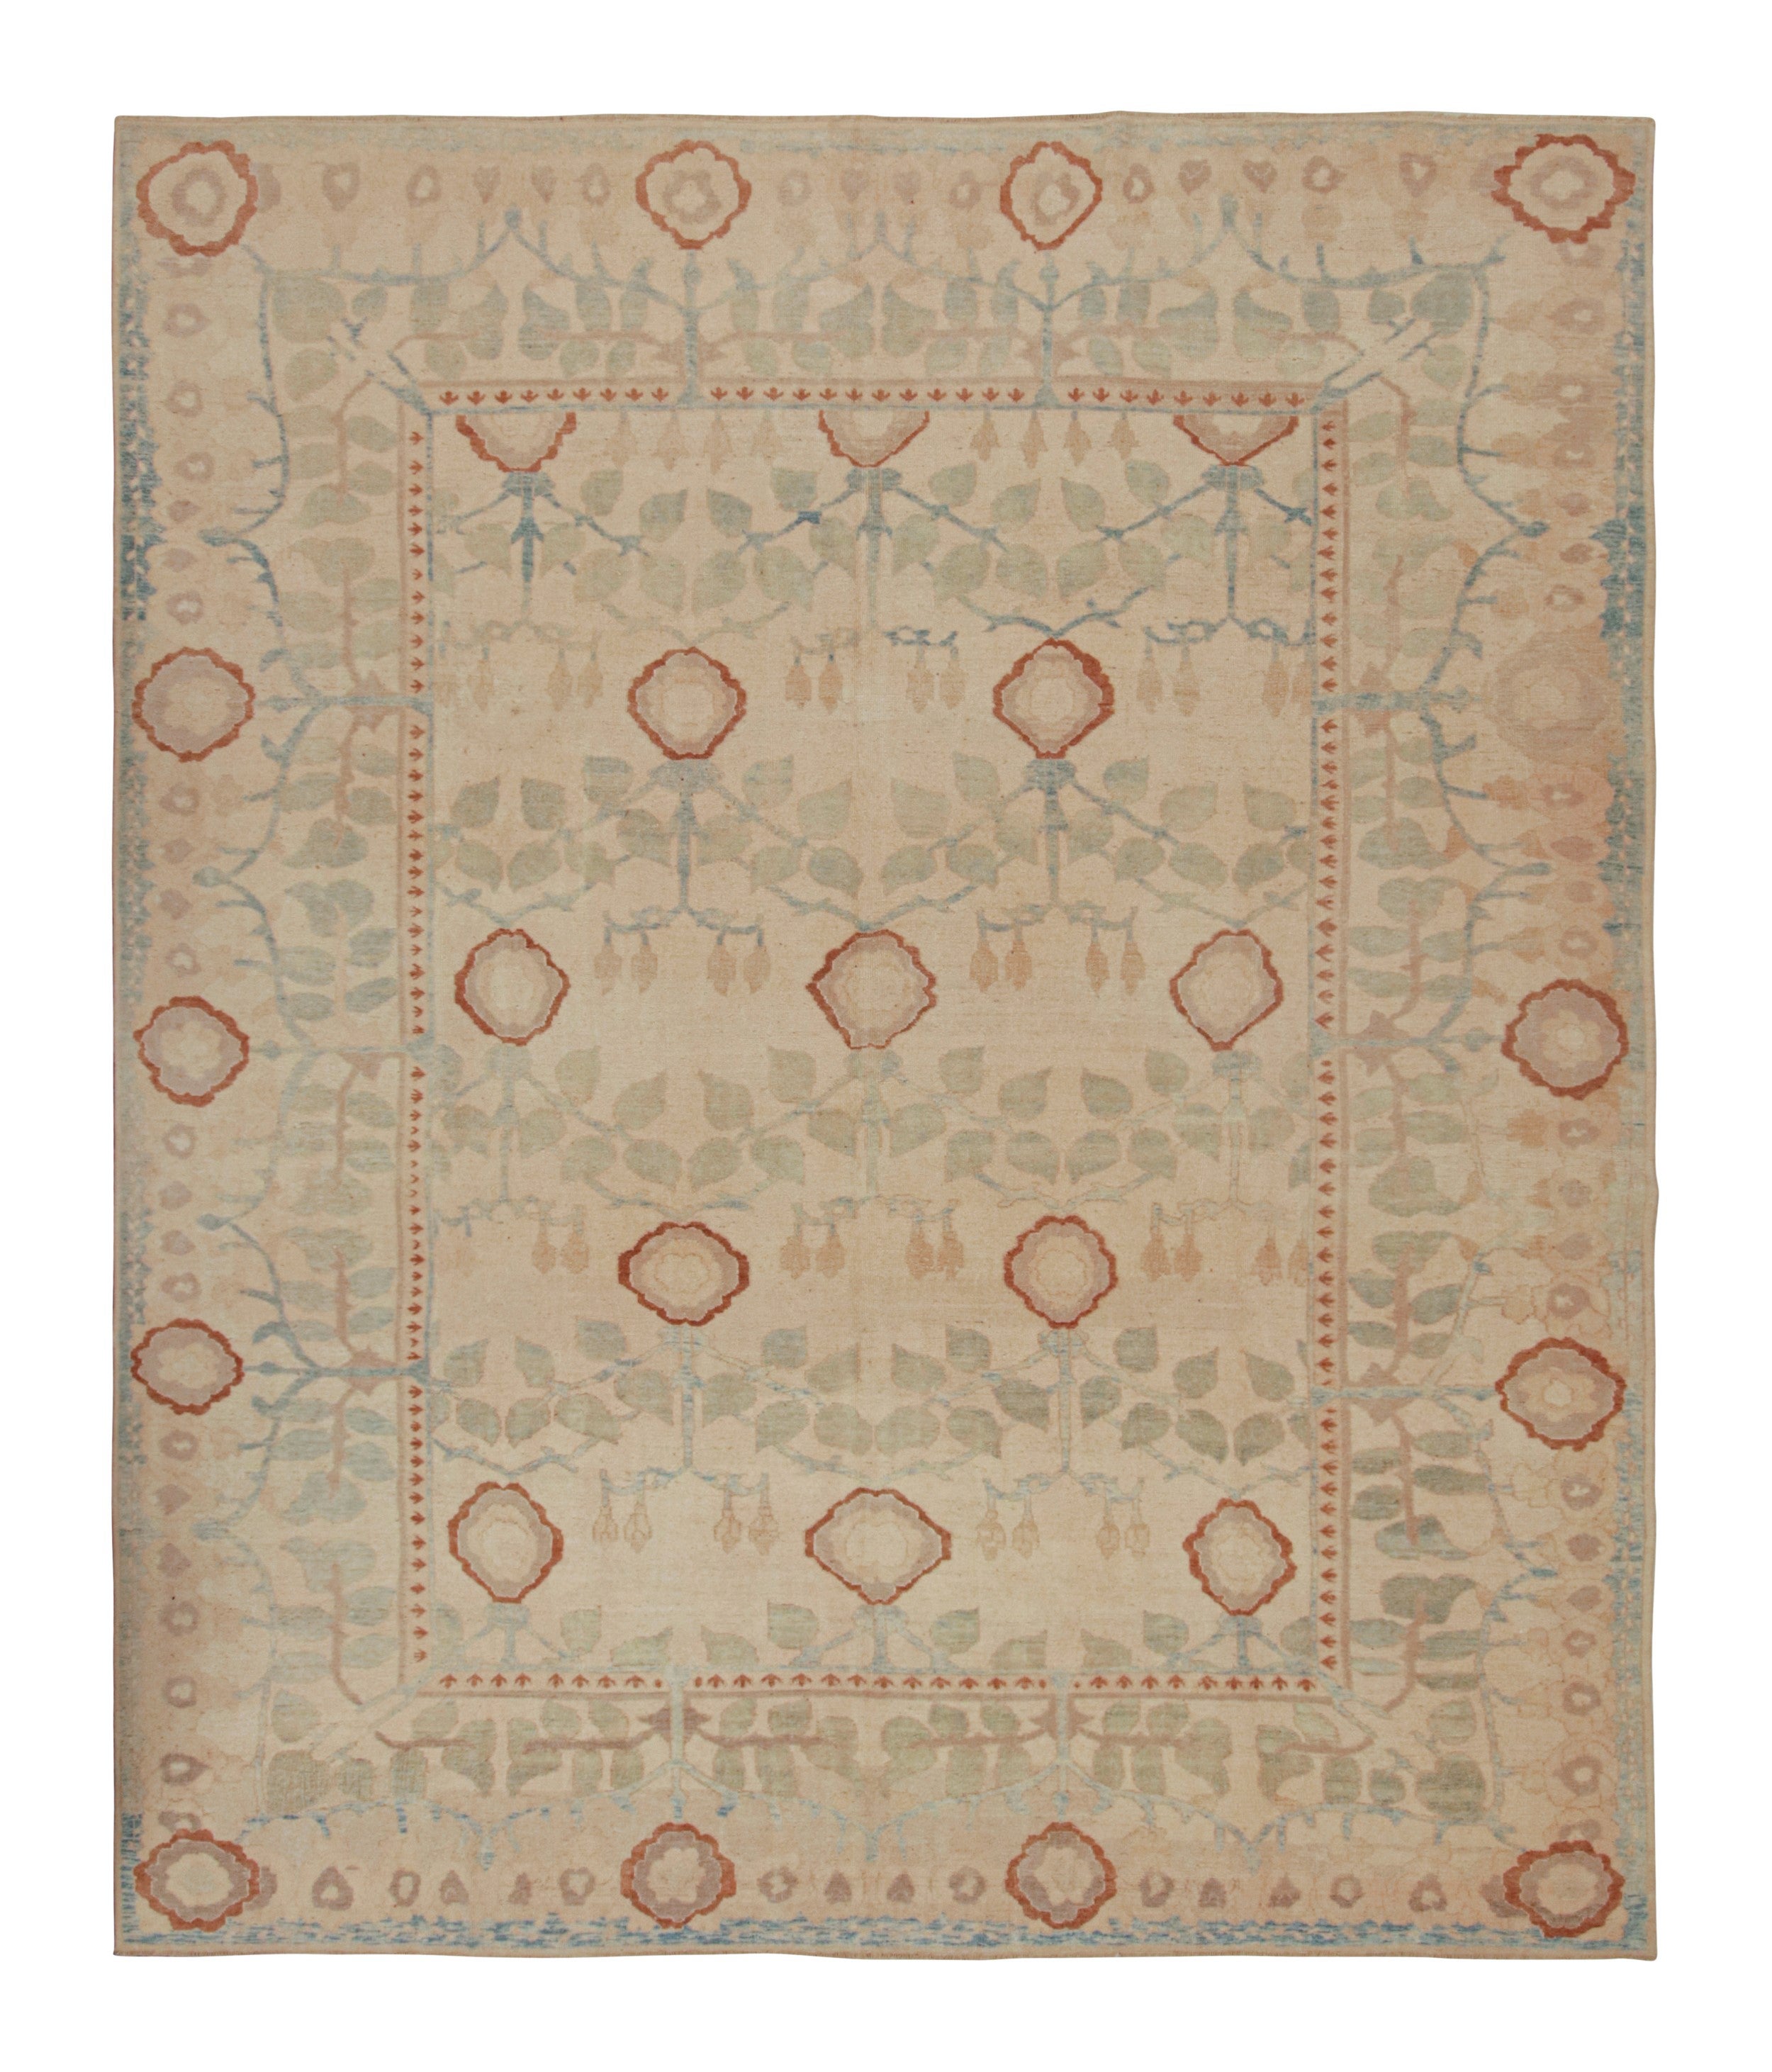 Antique Oushak Rug in Beige with Green and Blue Floral Patterns from Rug & Kilim For Sale